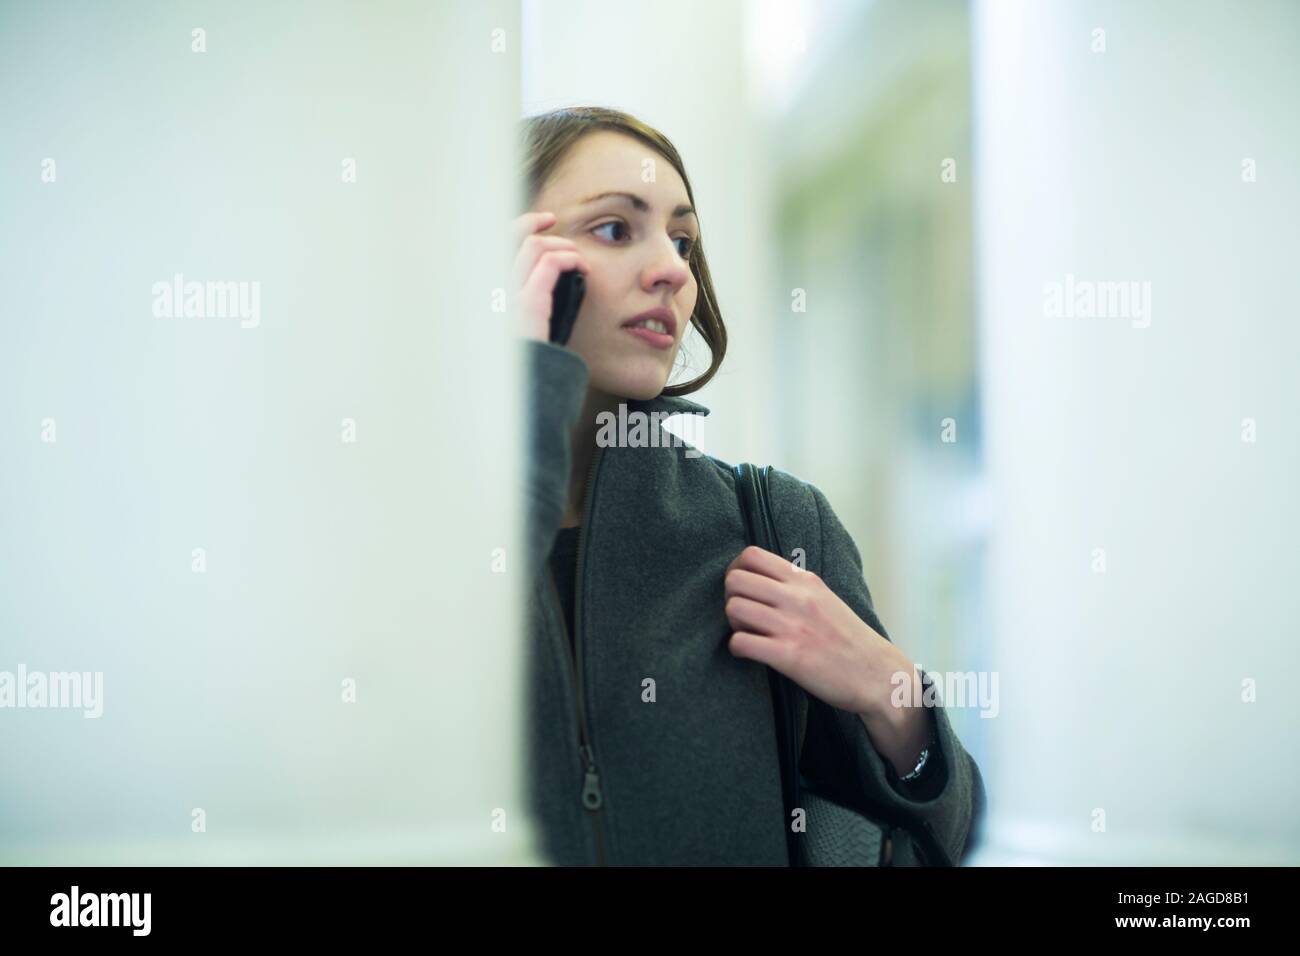 Young woman using smartphone Stock Photo